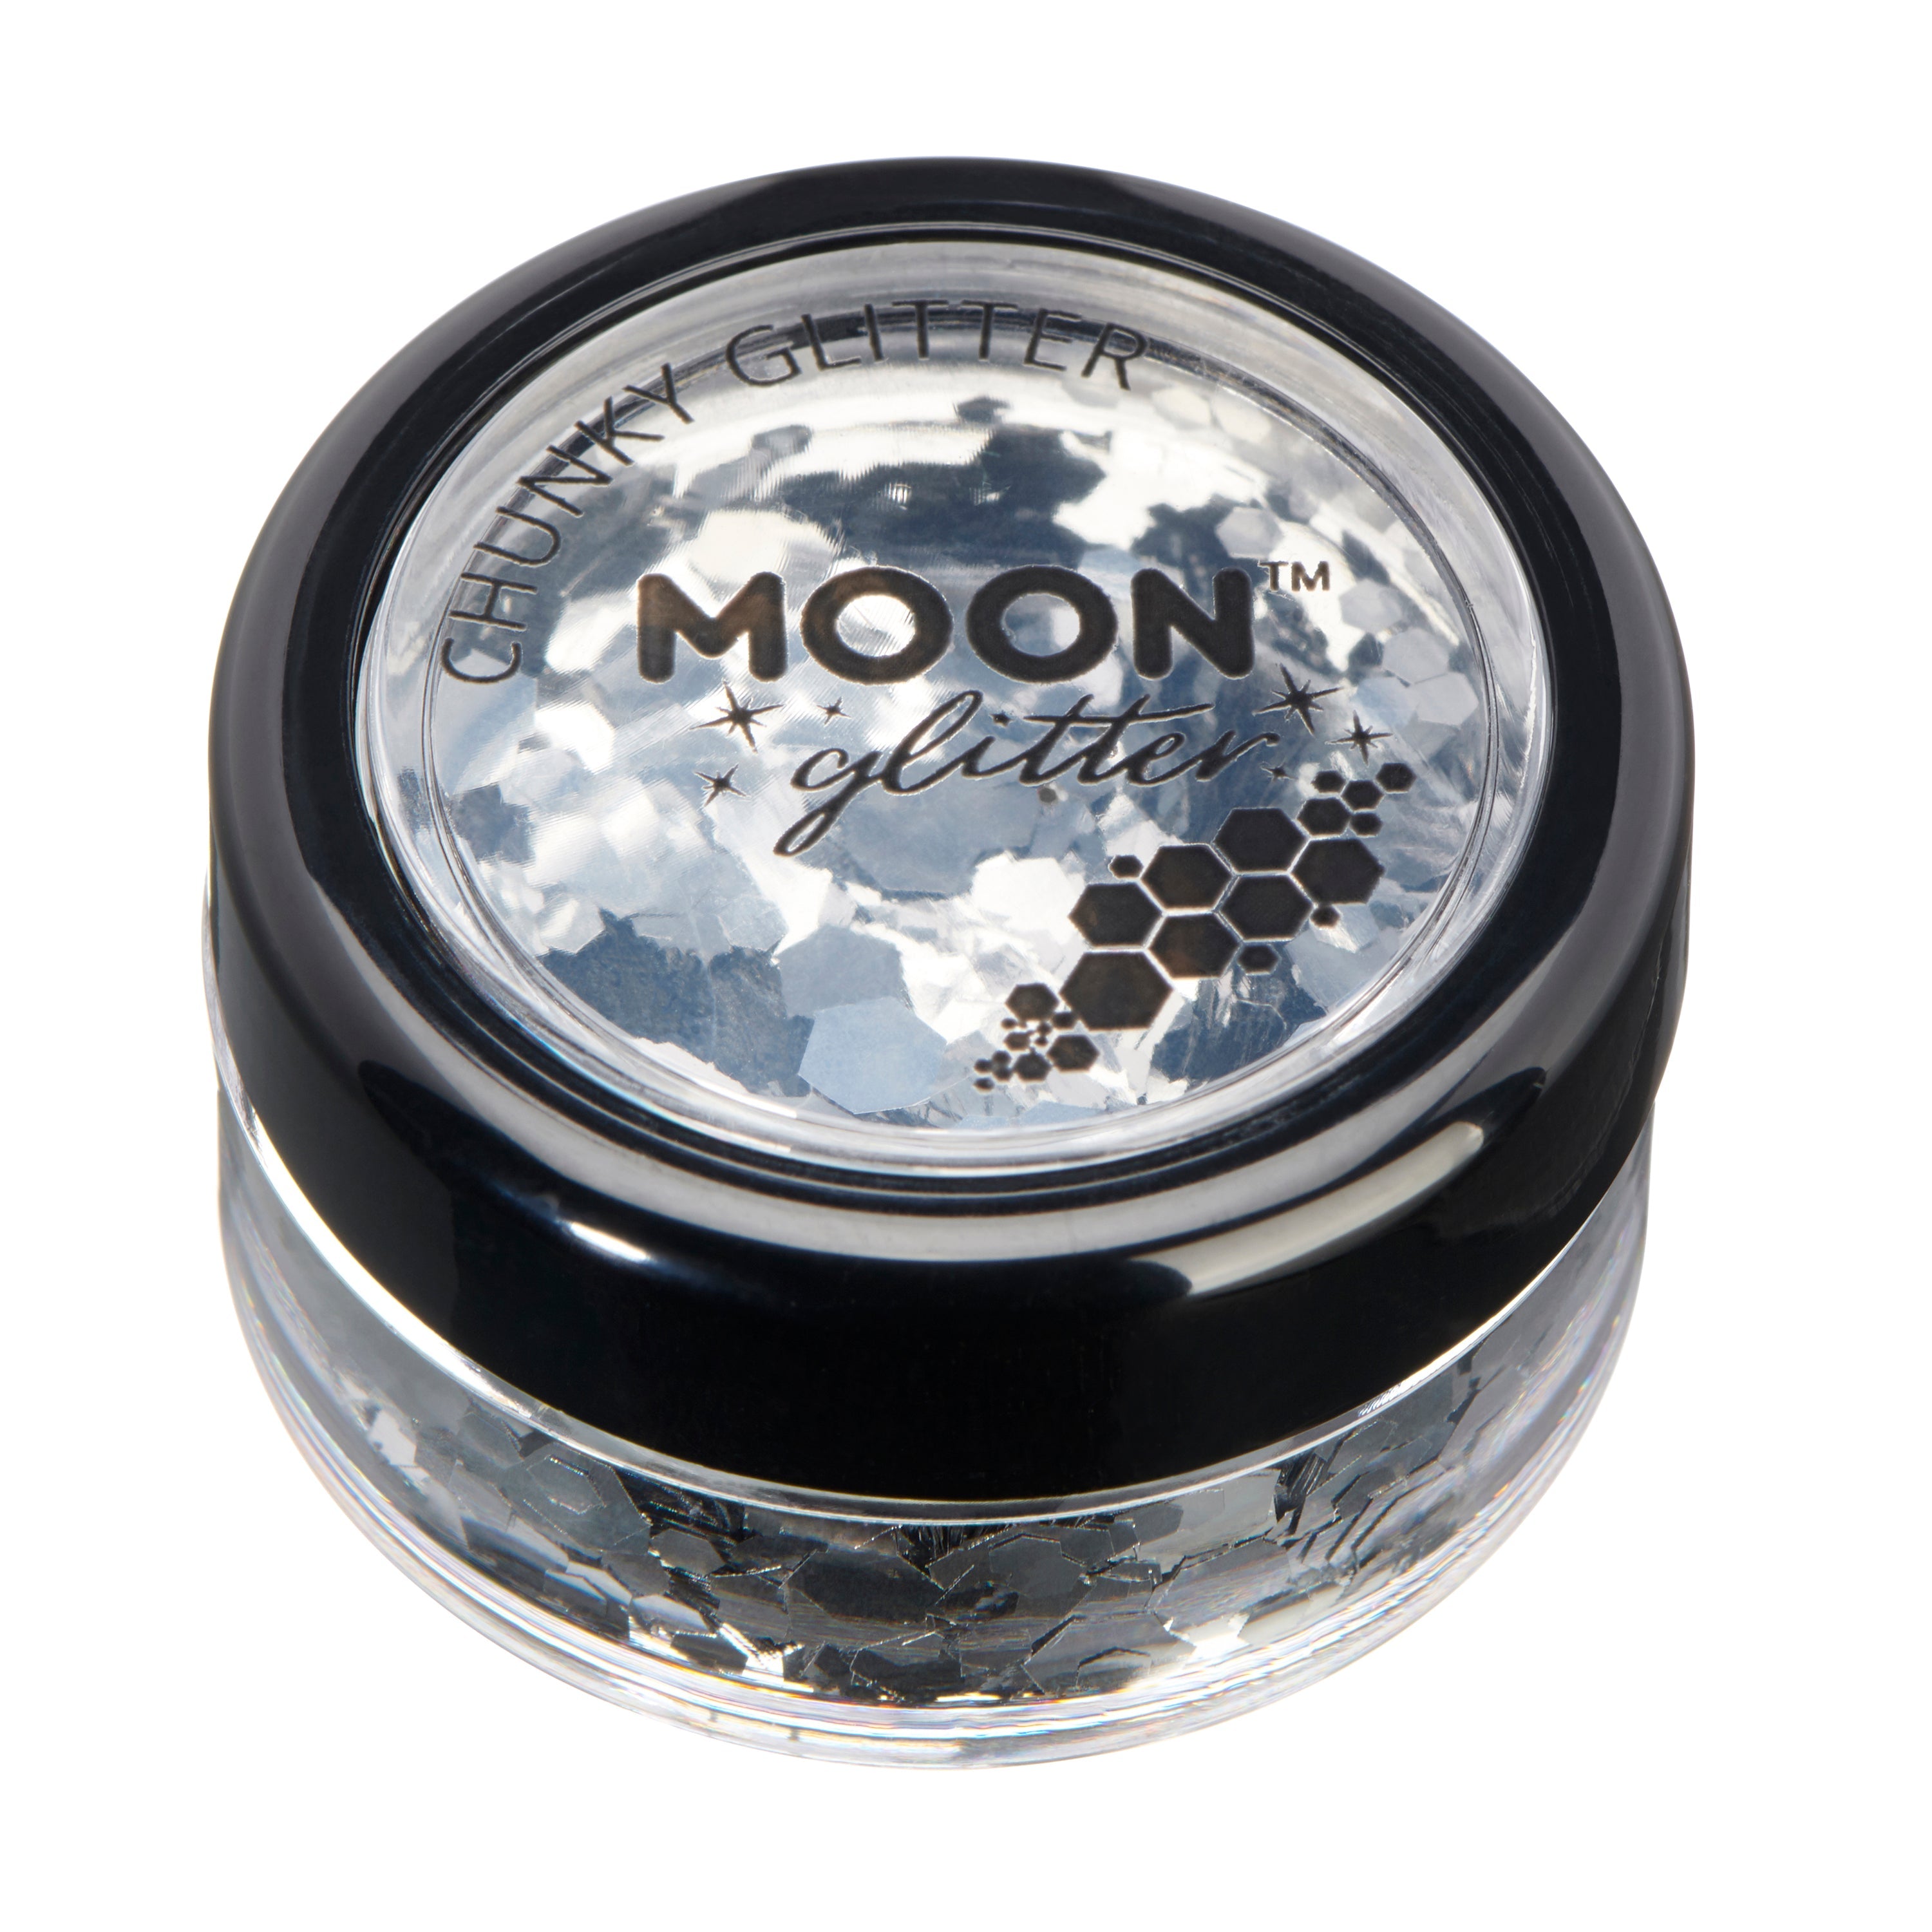 Silver - Classic Chunky Face & Body Glitter, 3g. Cosmetically certified, FDA & Health Canada compliant, cruelty free and vegan.